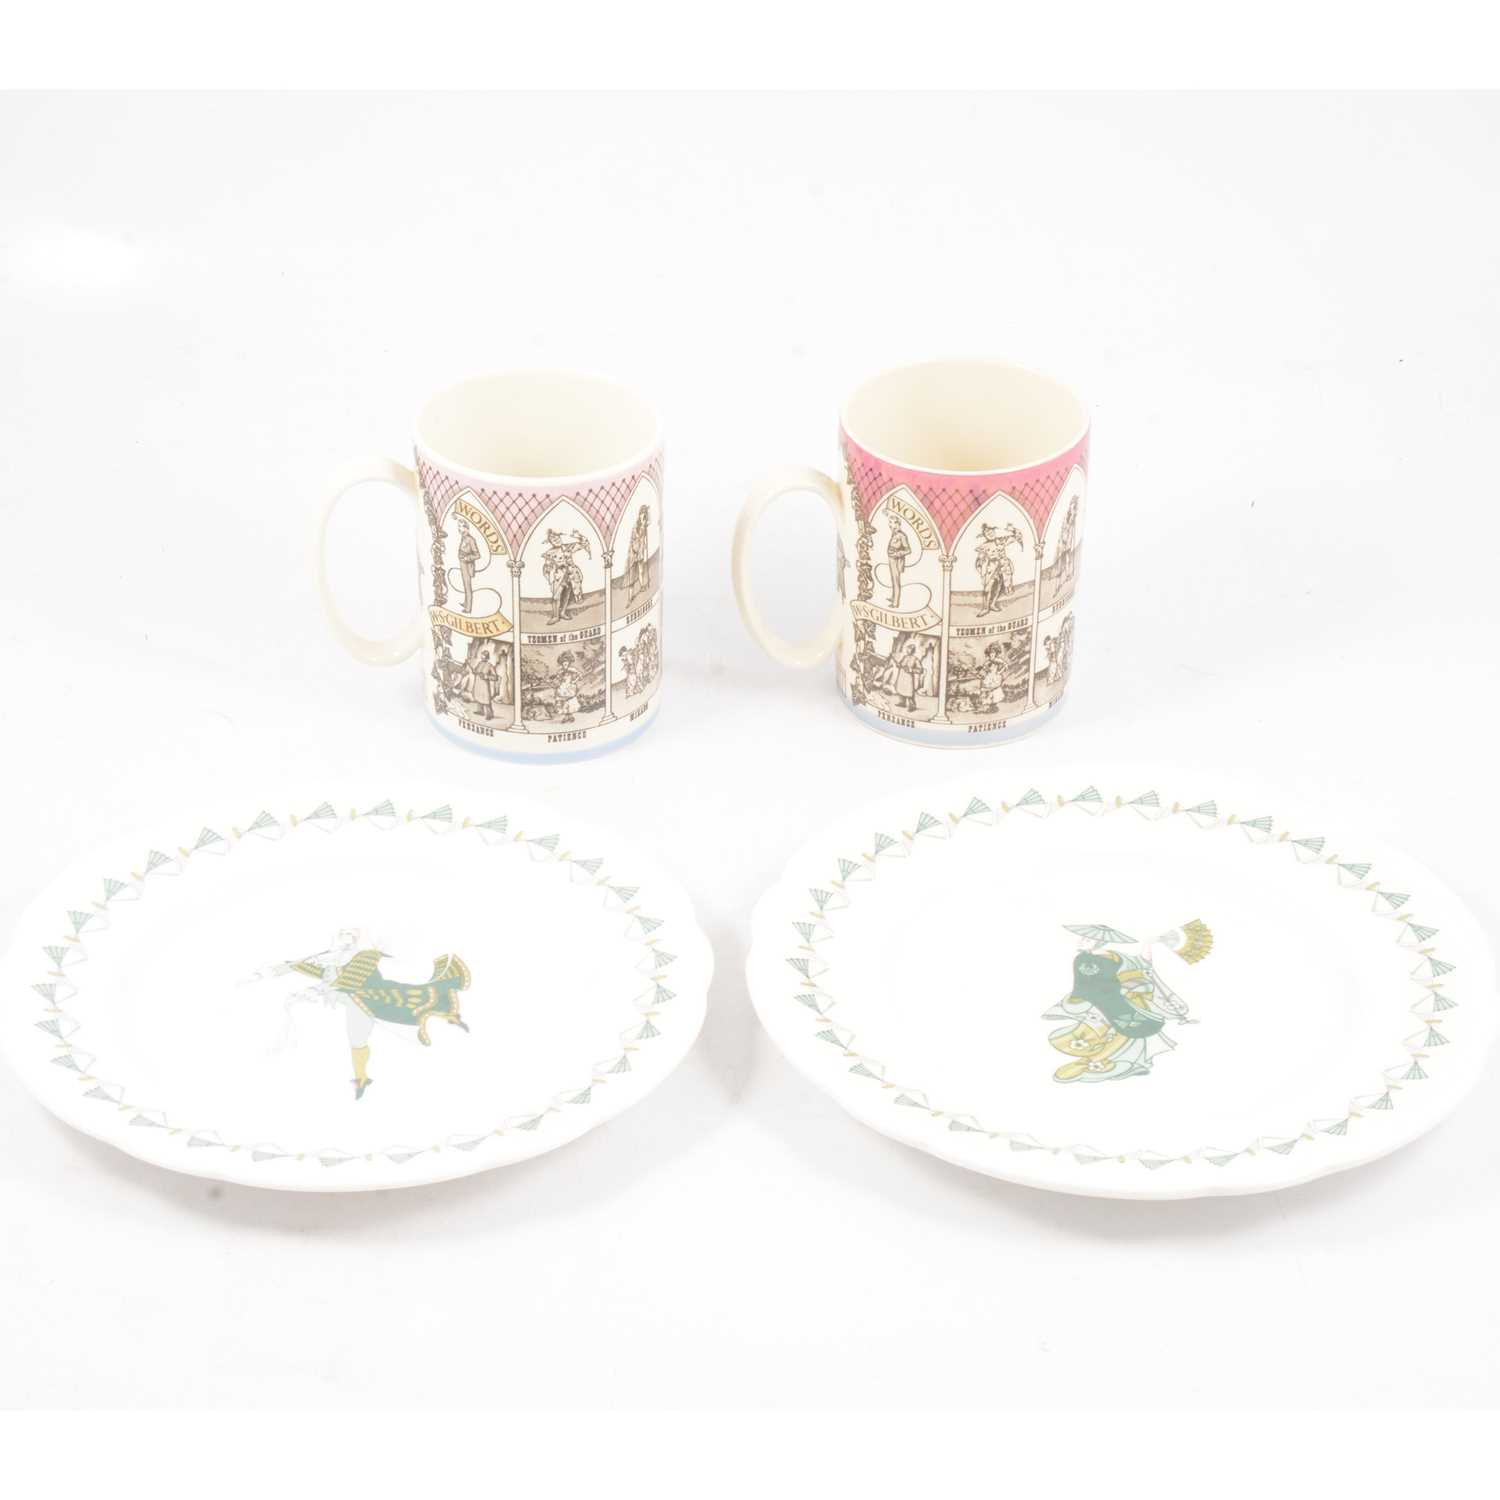 Lot 33 - Two Wedgwood of Etruria Gilbert and Sullivan Operas Mugs, two Royal Worcester Mikado plates.